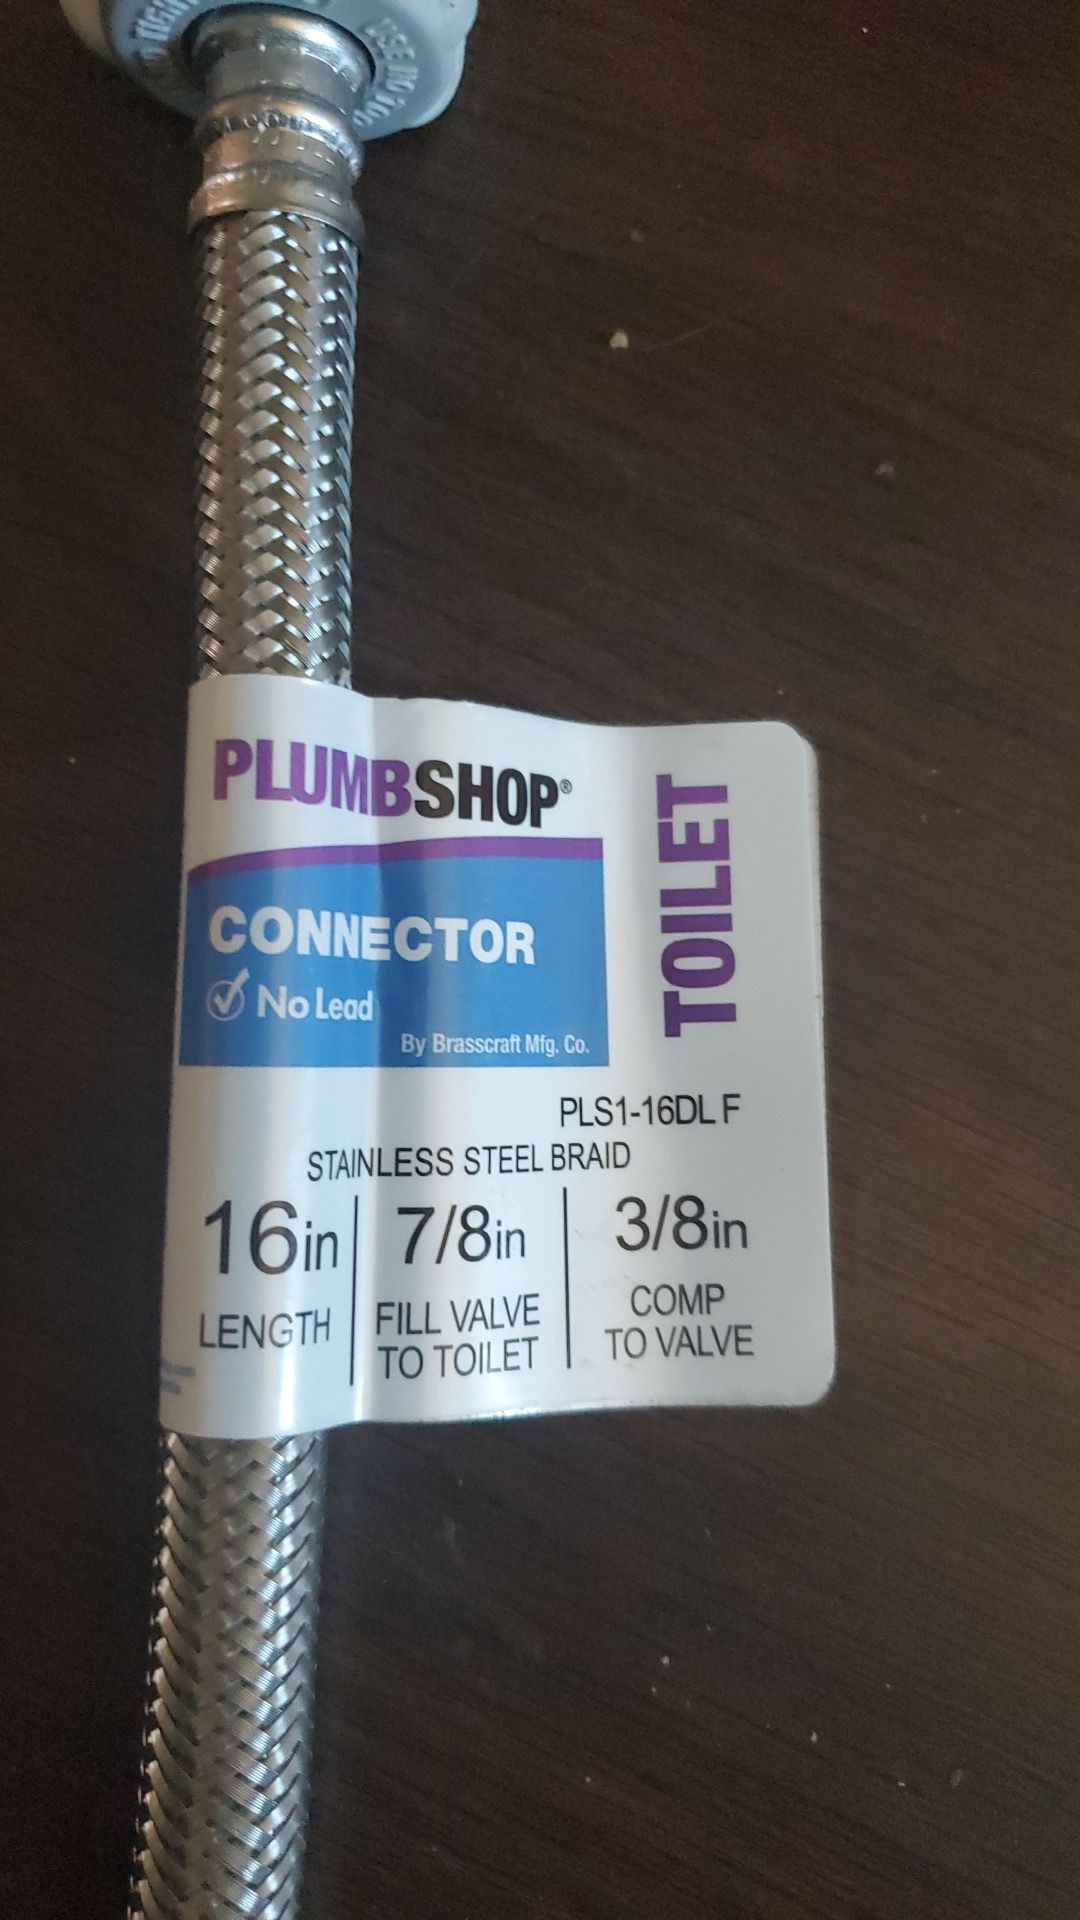 Connector stainless steel braid 16 in 7/8 3/8